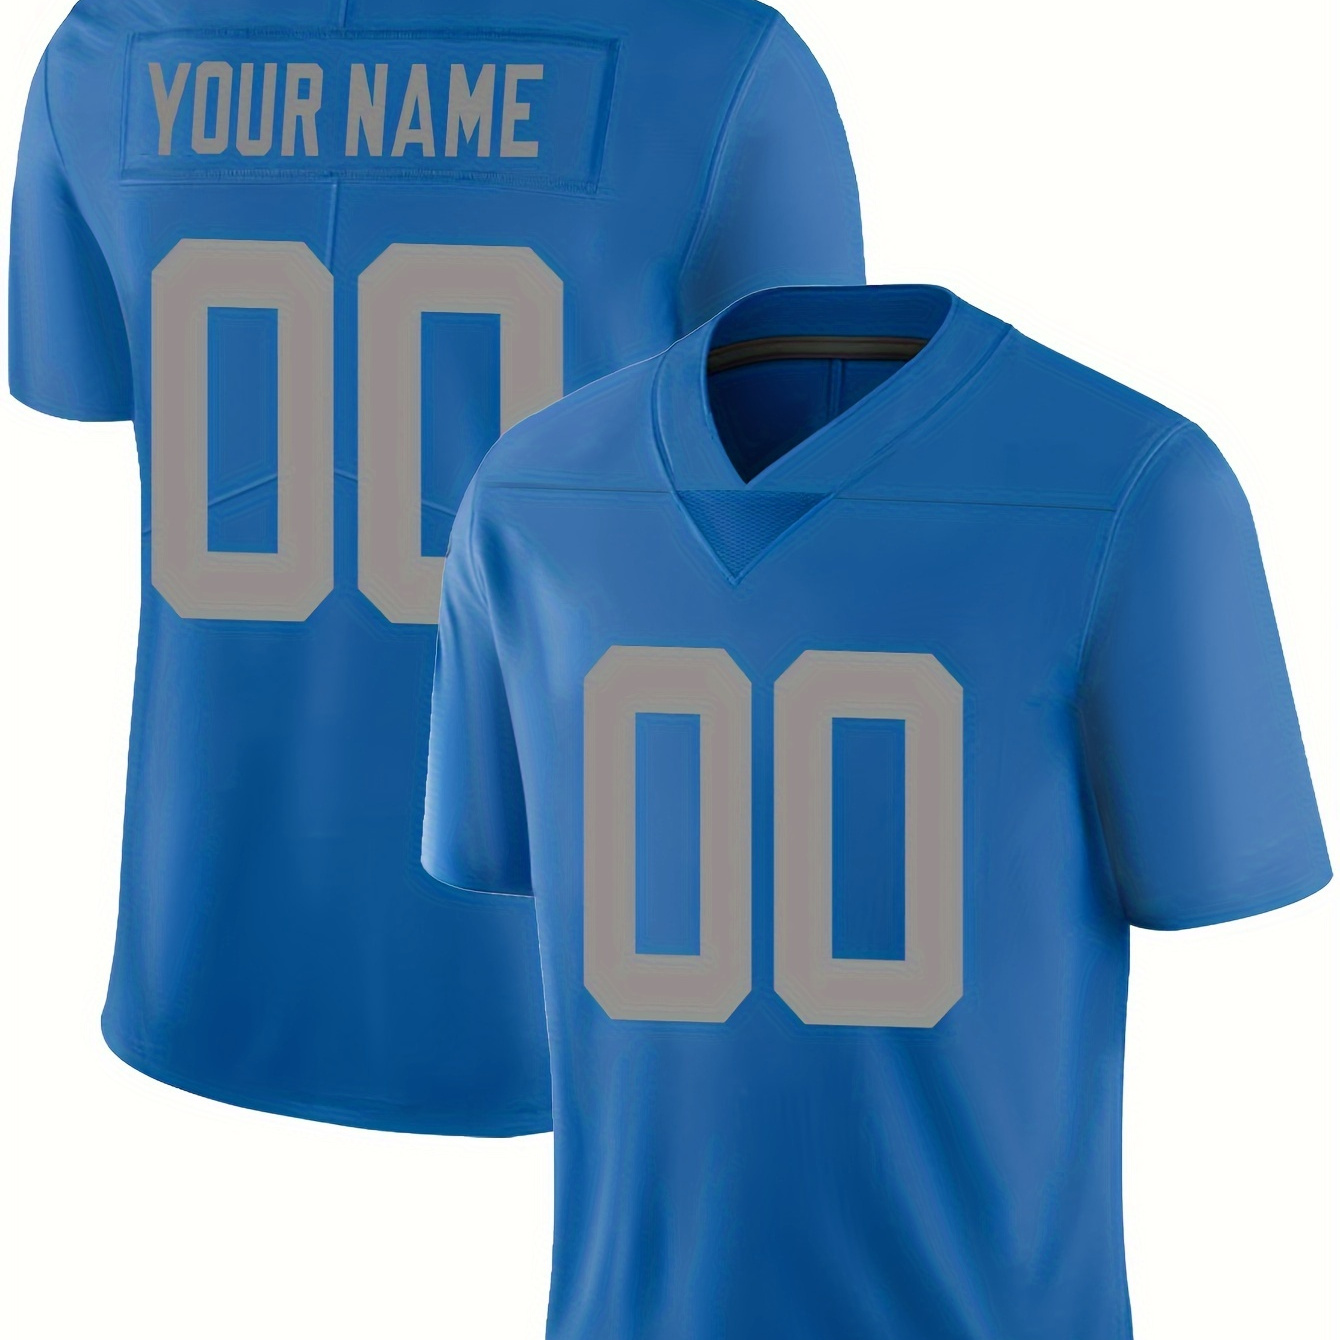 

Personalized Name And Number Men's Summer Rugby Jersey, Short Sleeve V-neck Embroidered Loose Sports Uniform For Summer, Party And Matches